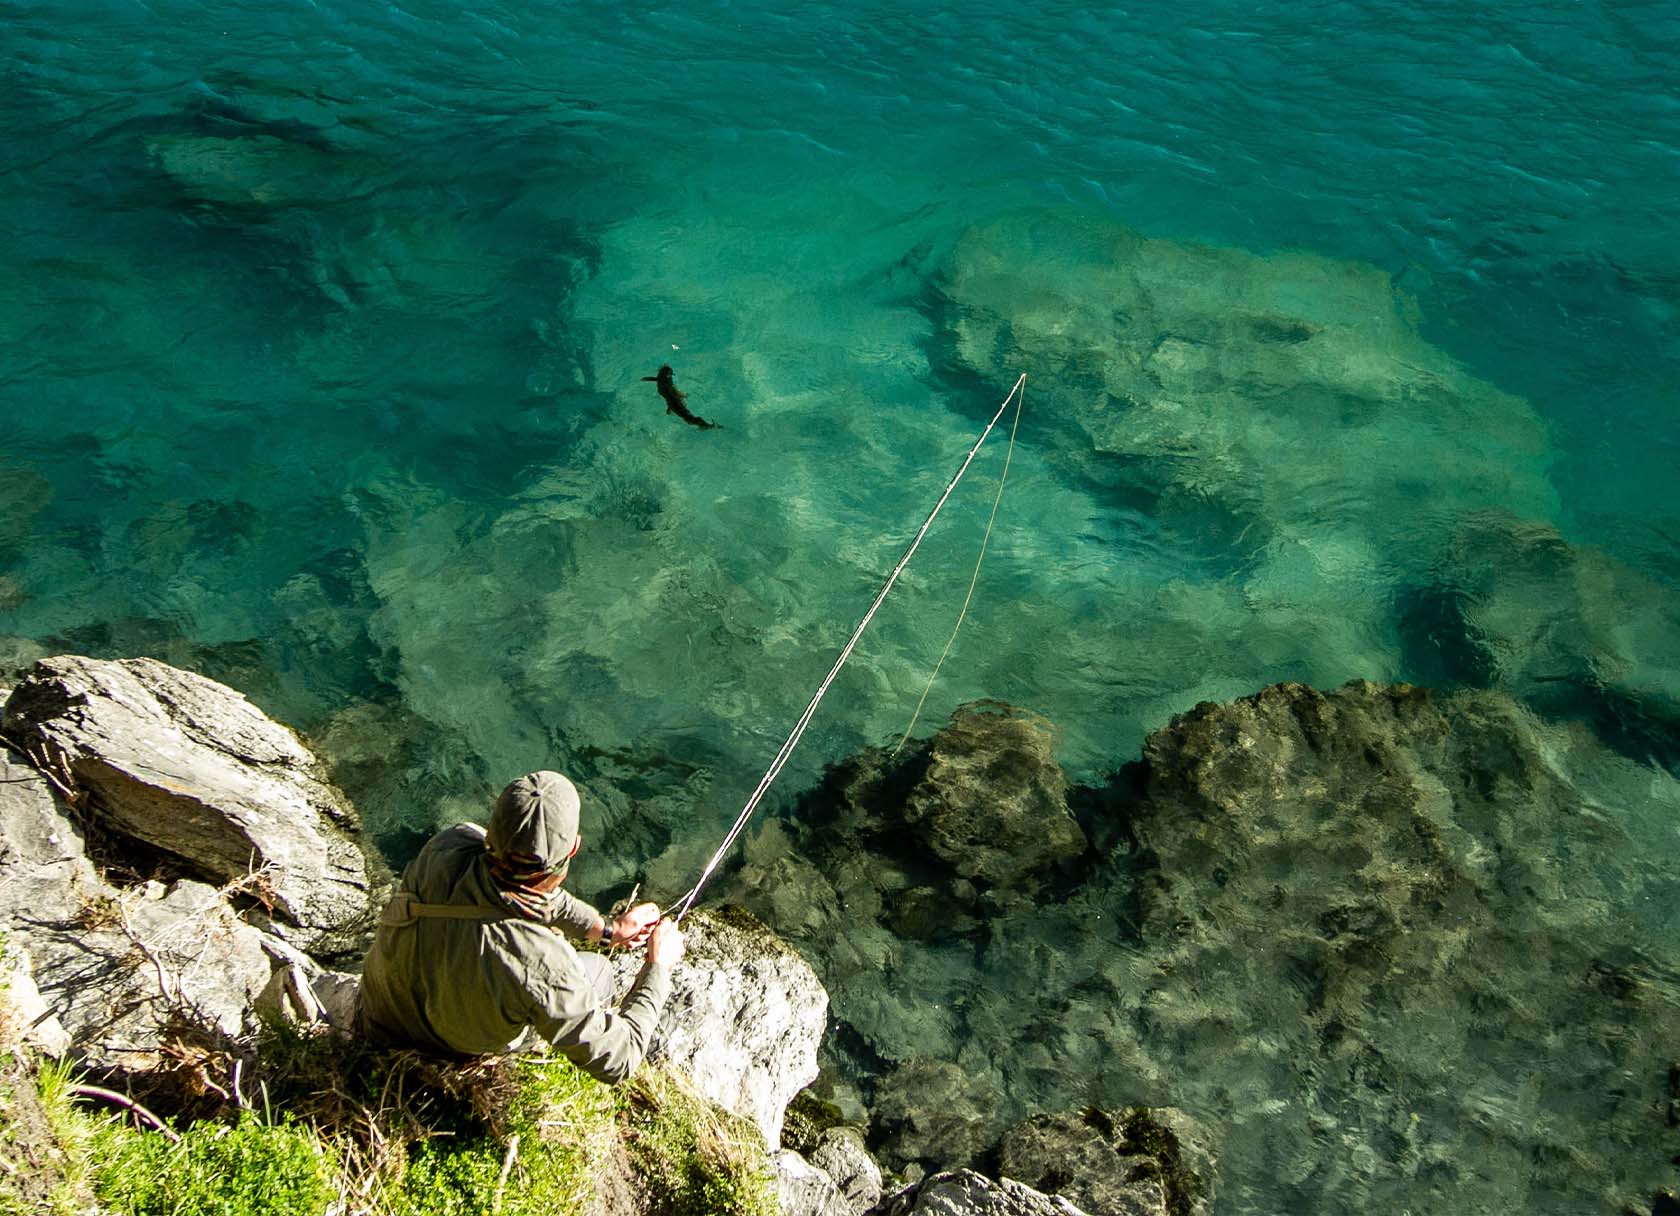 Angler catching a trout in New Zealand